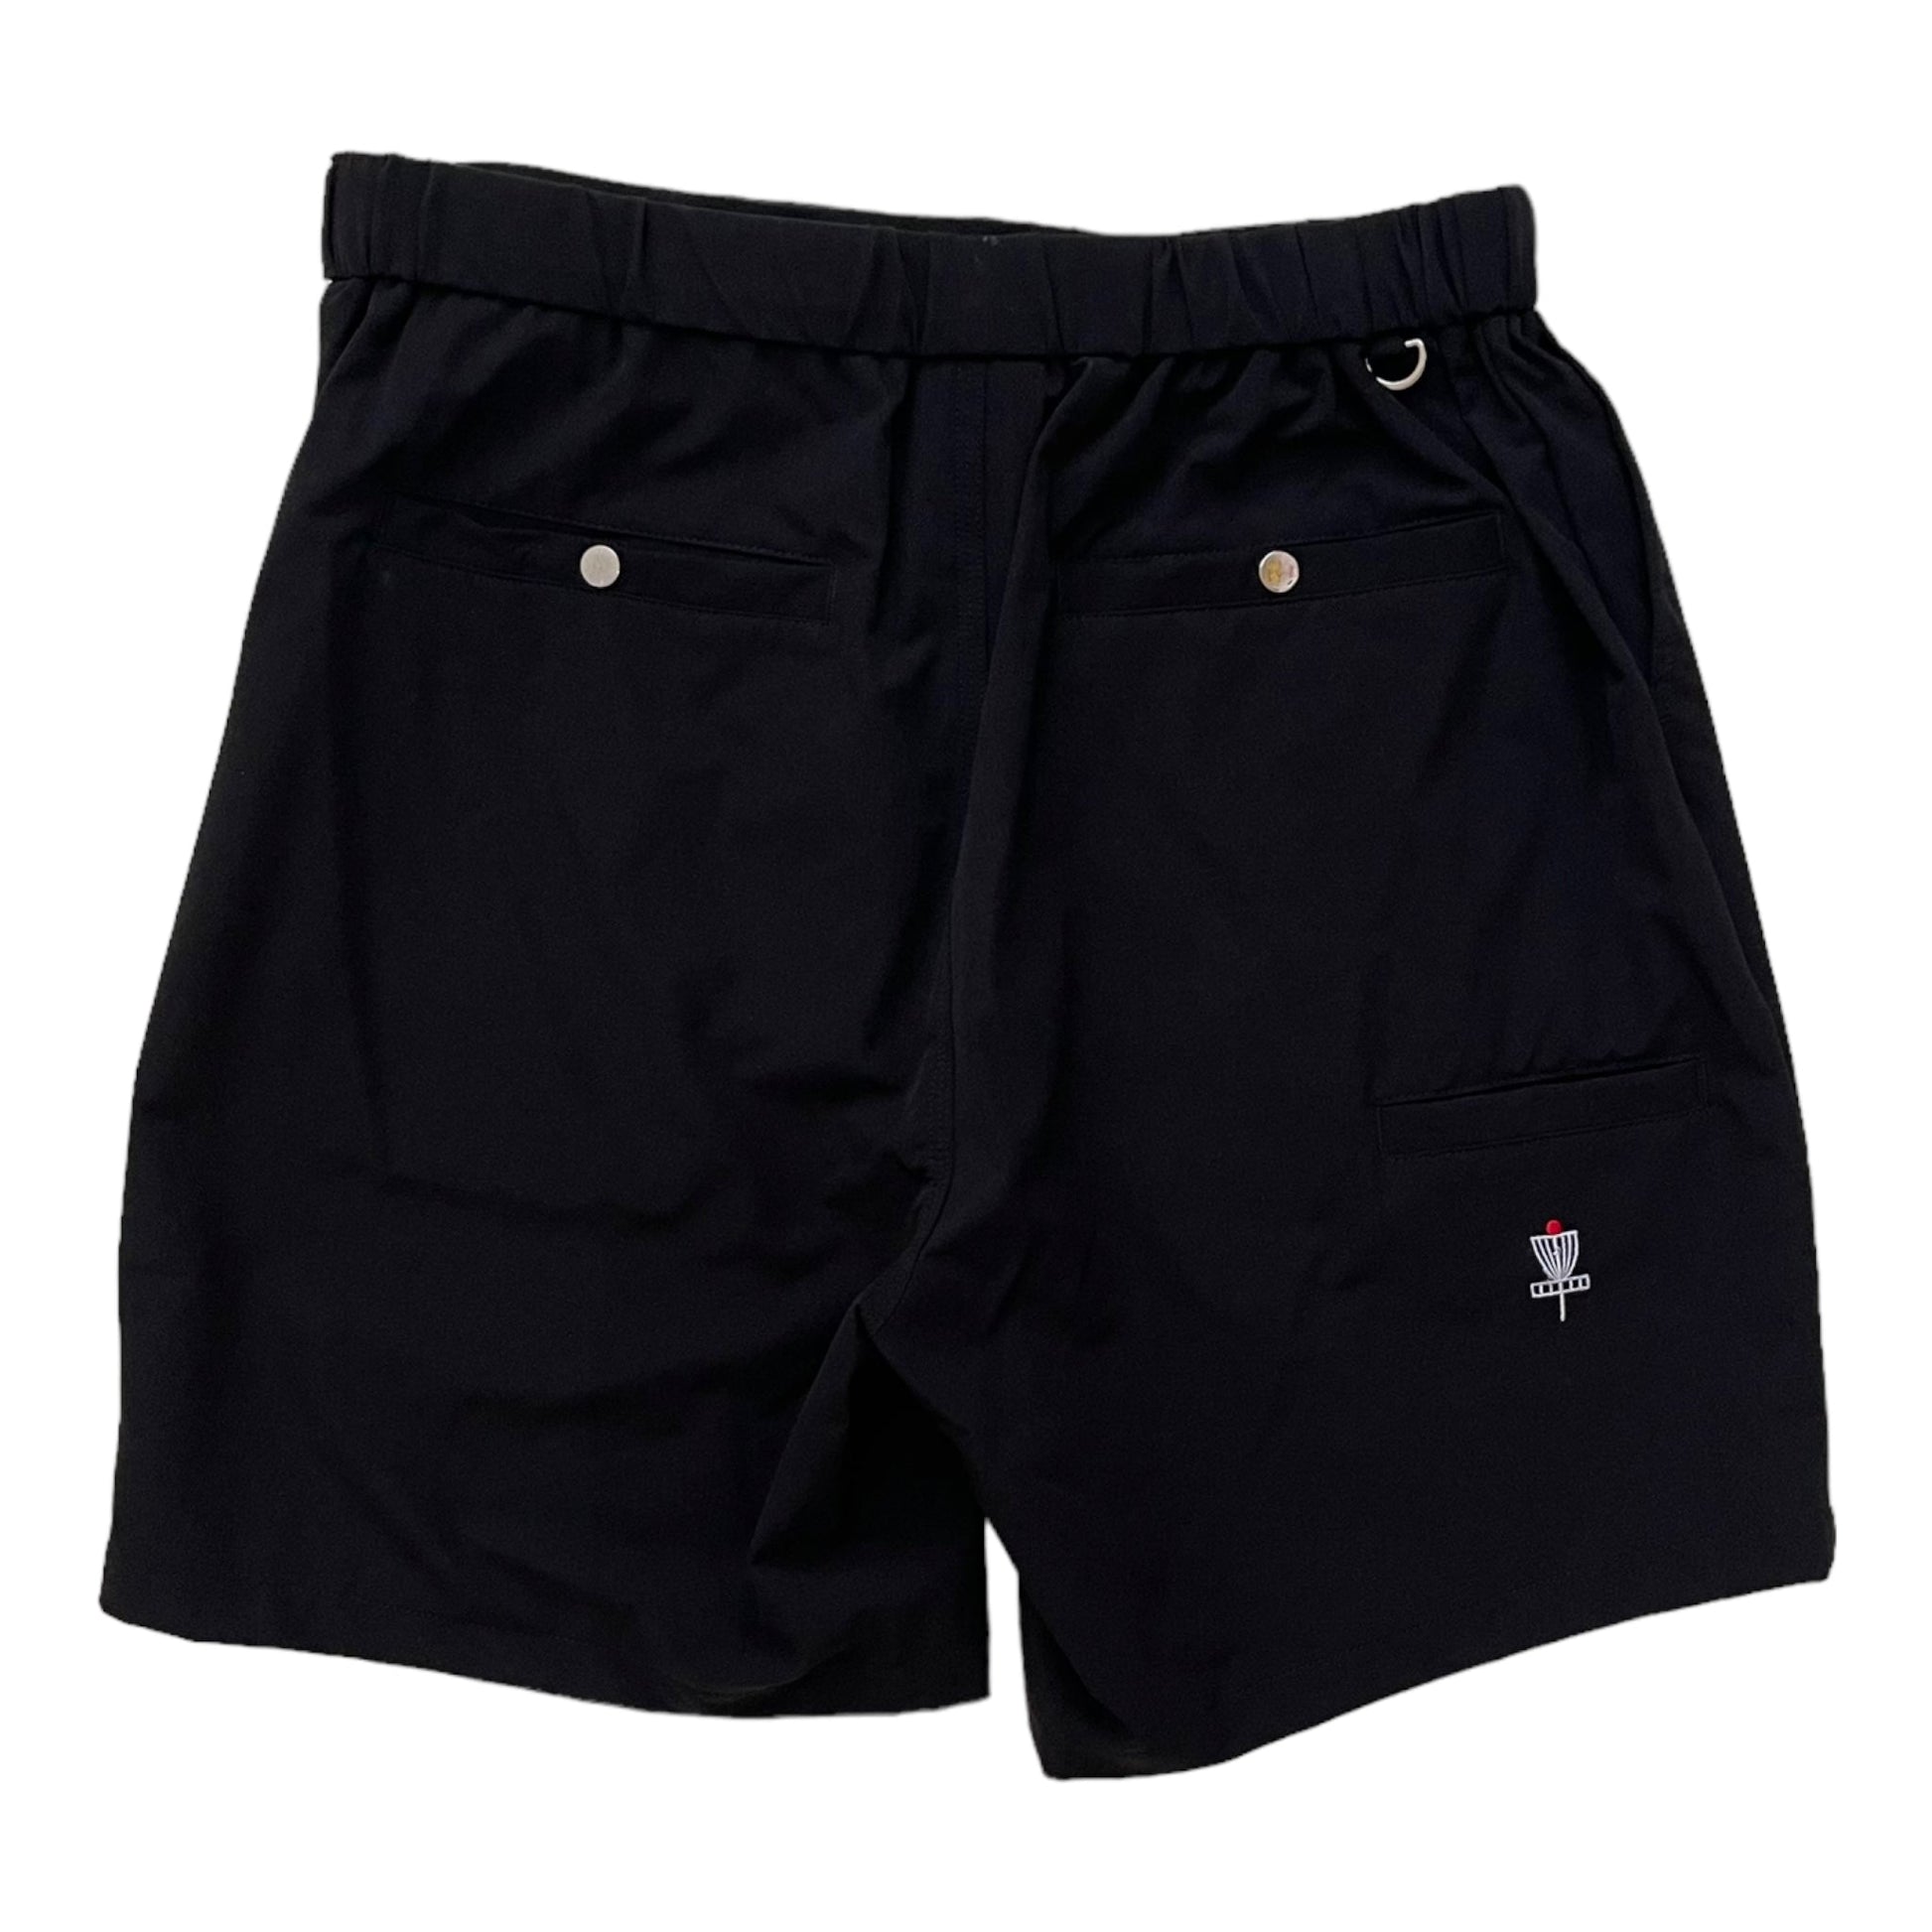 Perks and Re-creation MP1 Shorts - Black Disc Golf